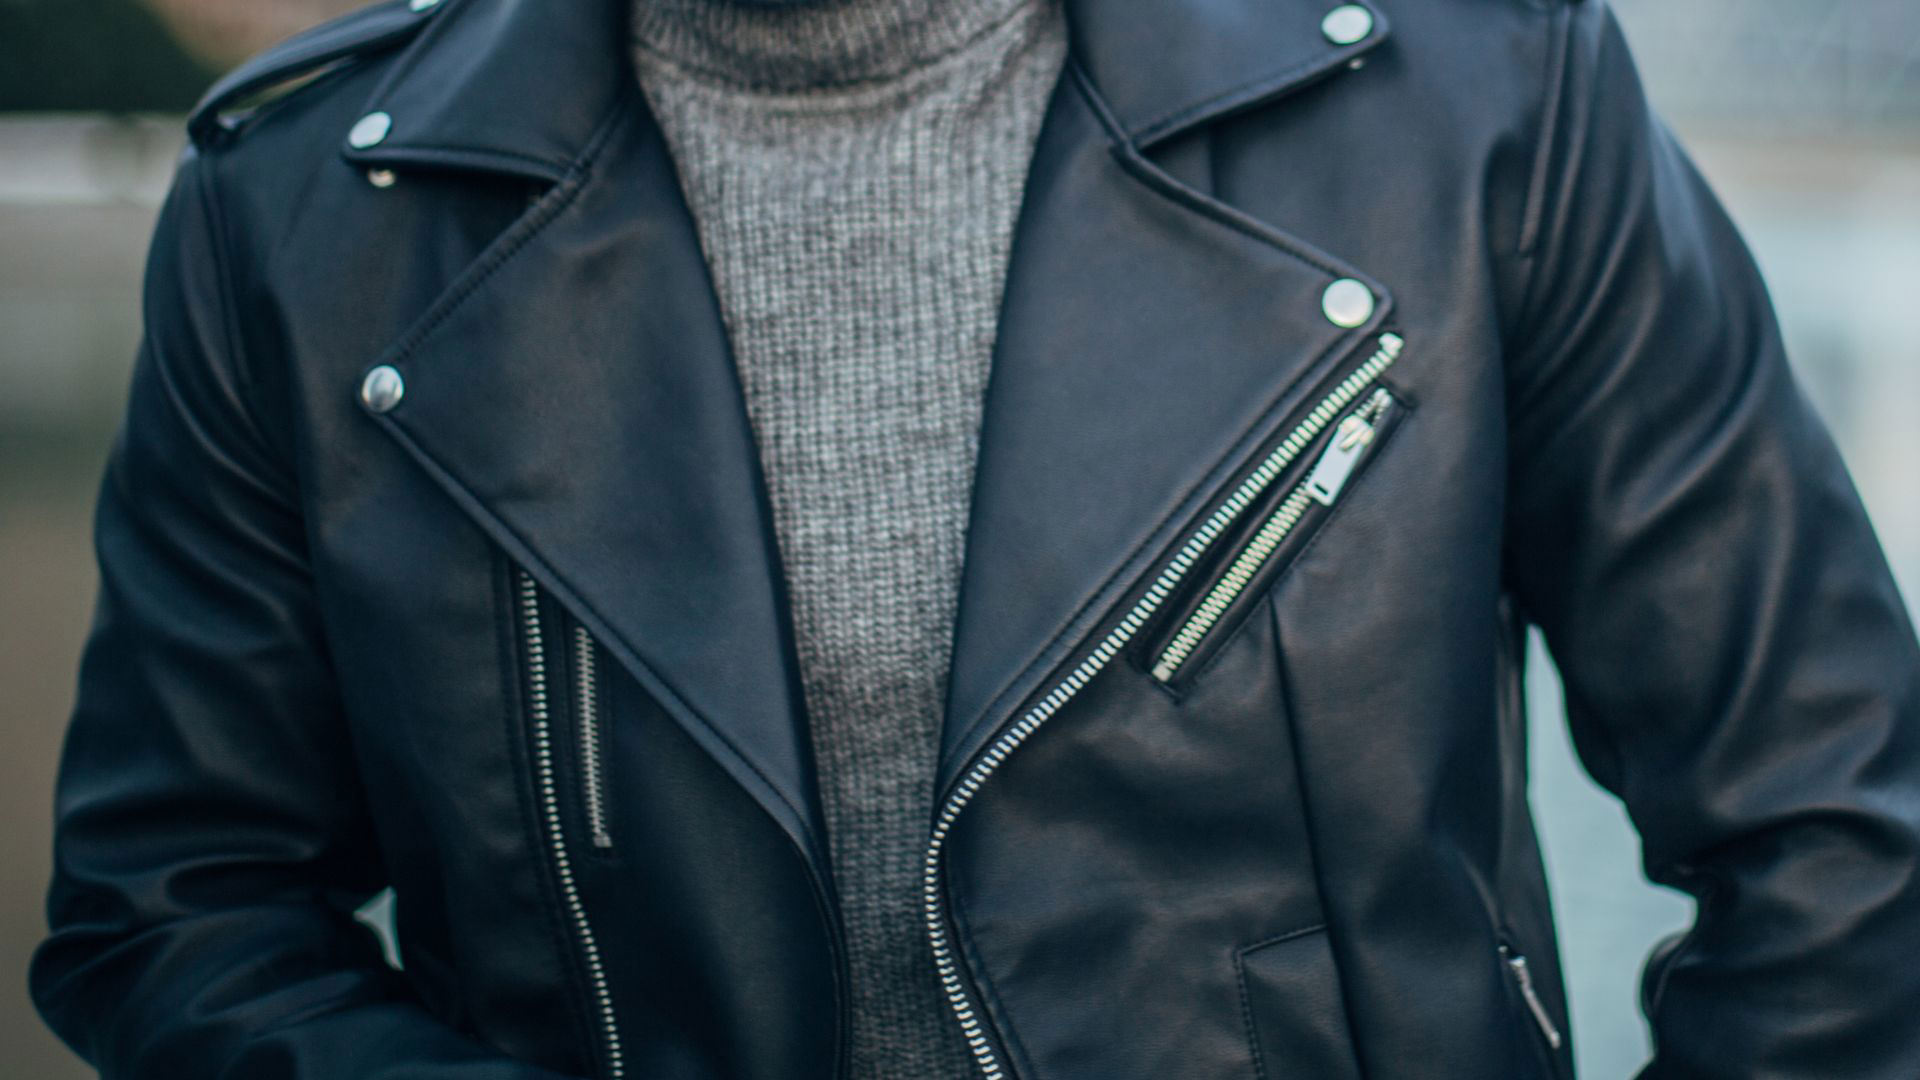 How to clean a leather jacket without dry cleaning